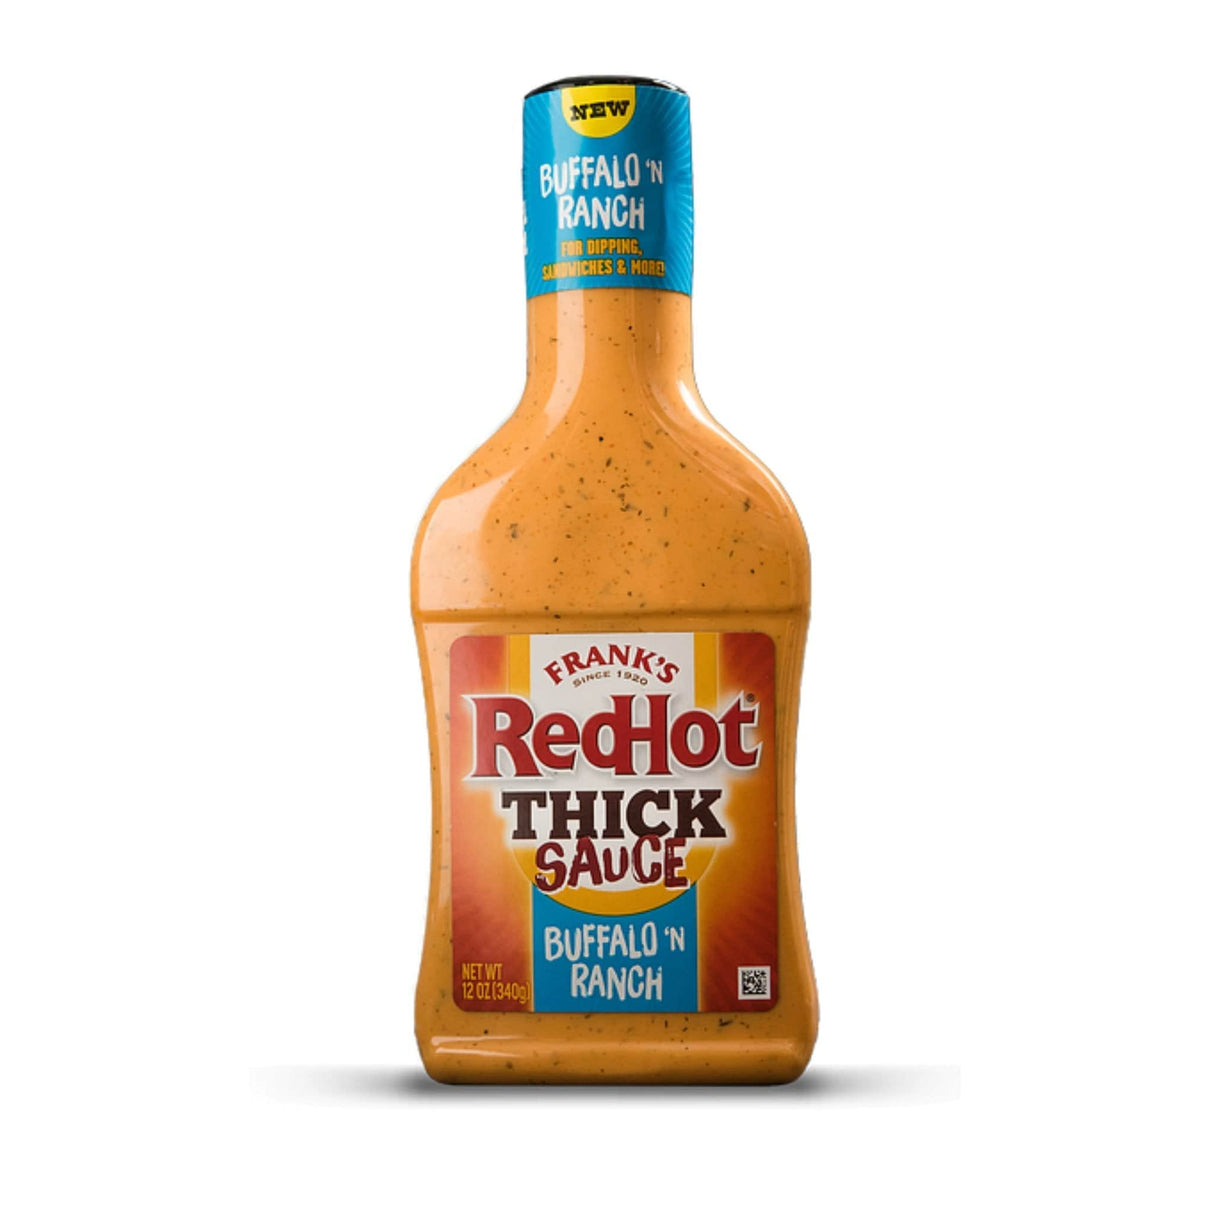 Frank's RedHot Thick Sauce Buffalo 'N Ranch - hot sauce market & more